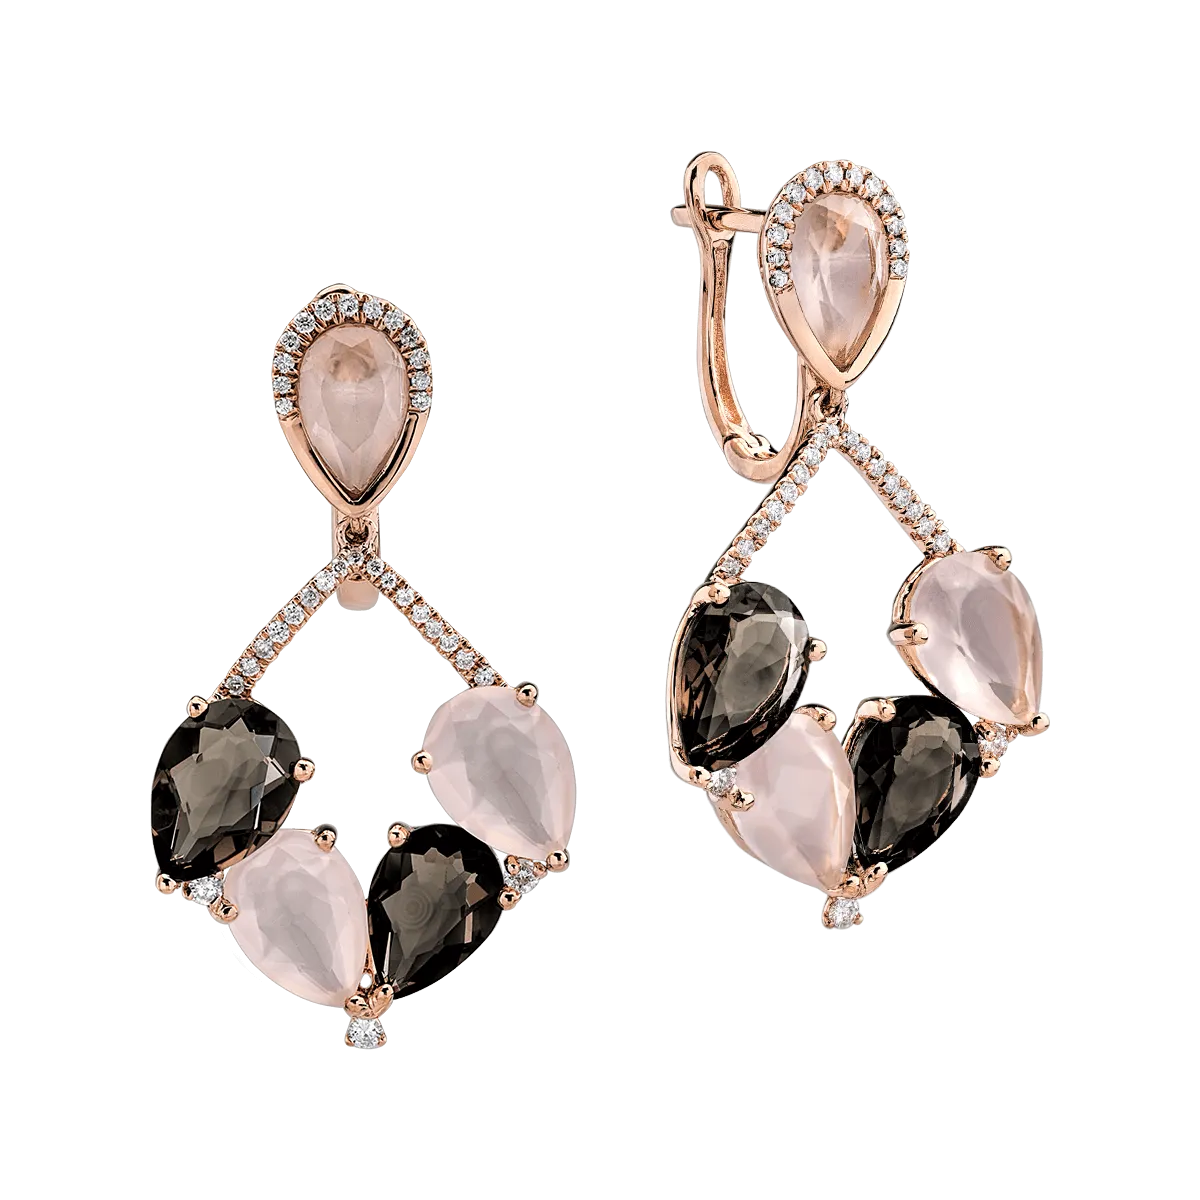 18K rose gold earrings with 0.314ct diamonds and 9.94ct quartz